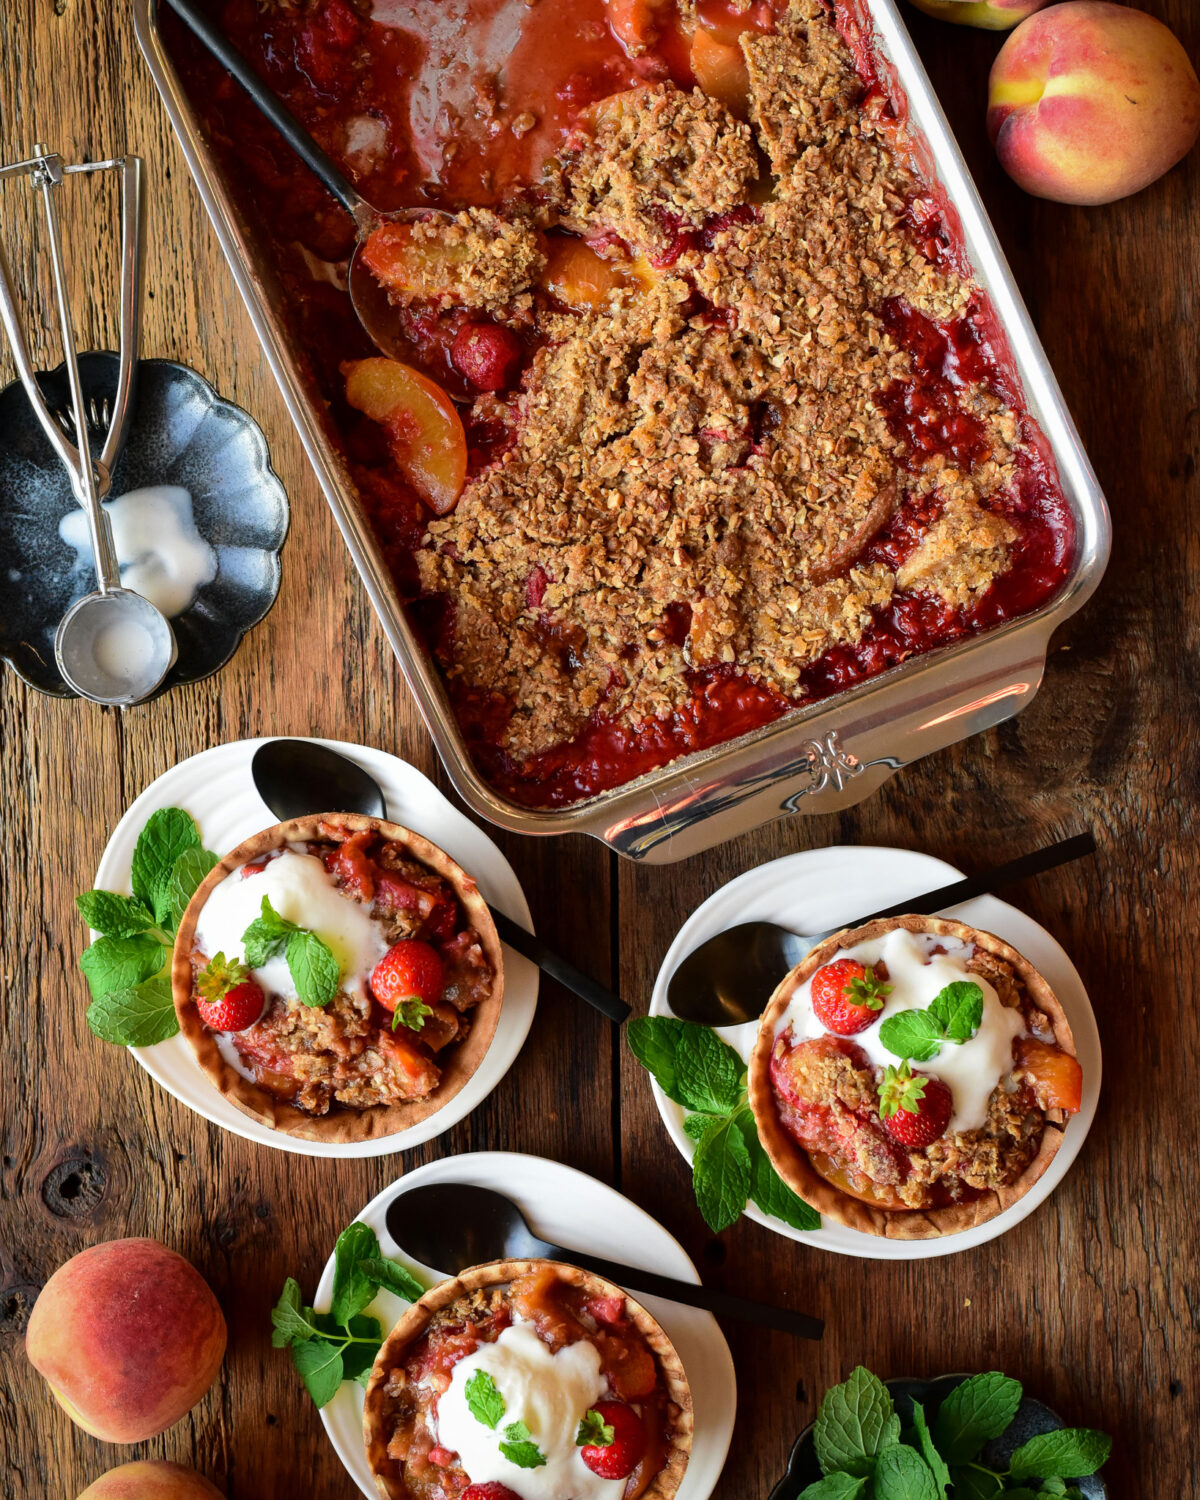 A baking tray with a baked Peach Strawberry Crisp with three bowls served with ice cream and mint.